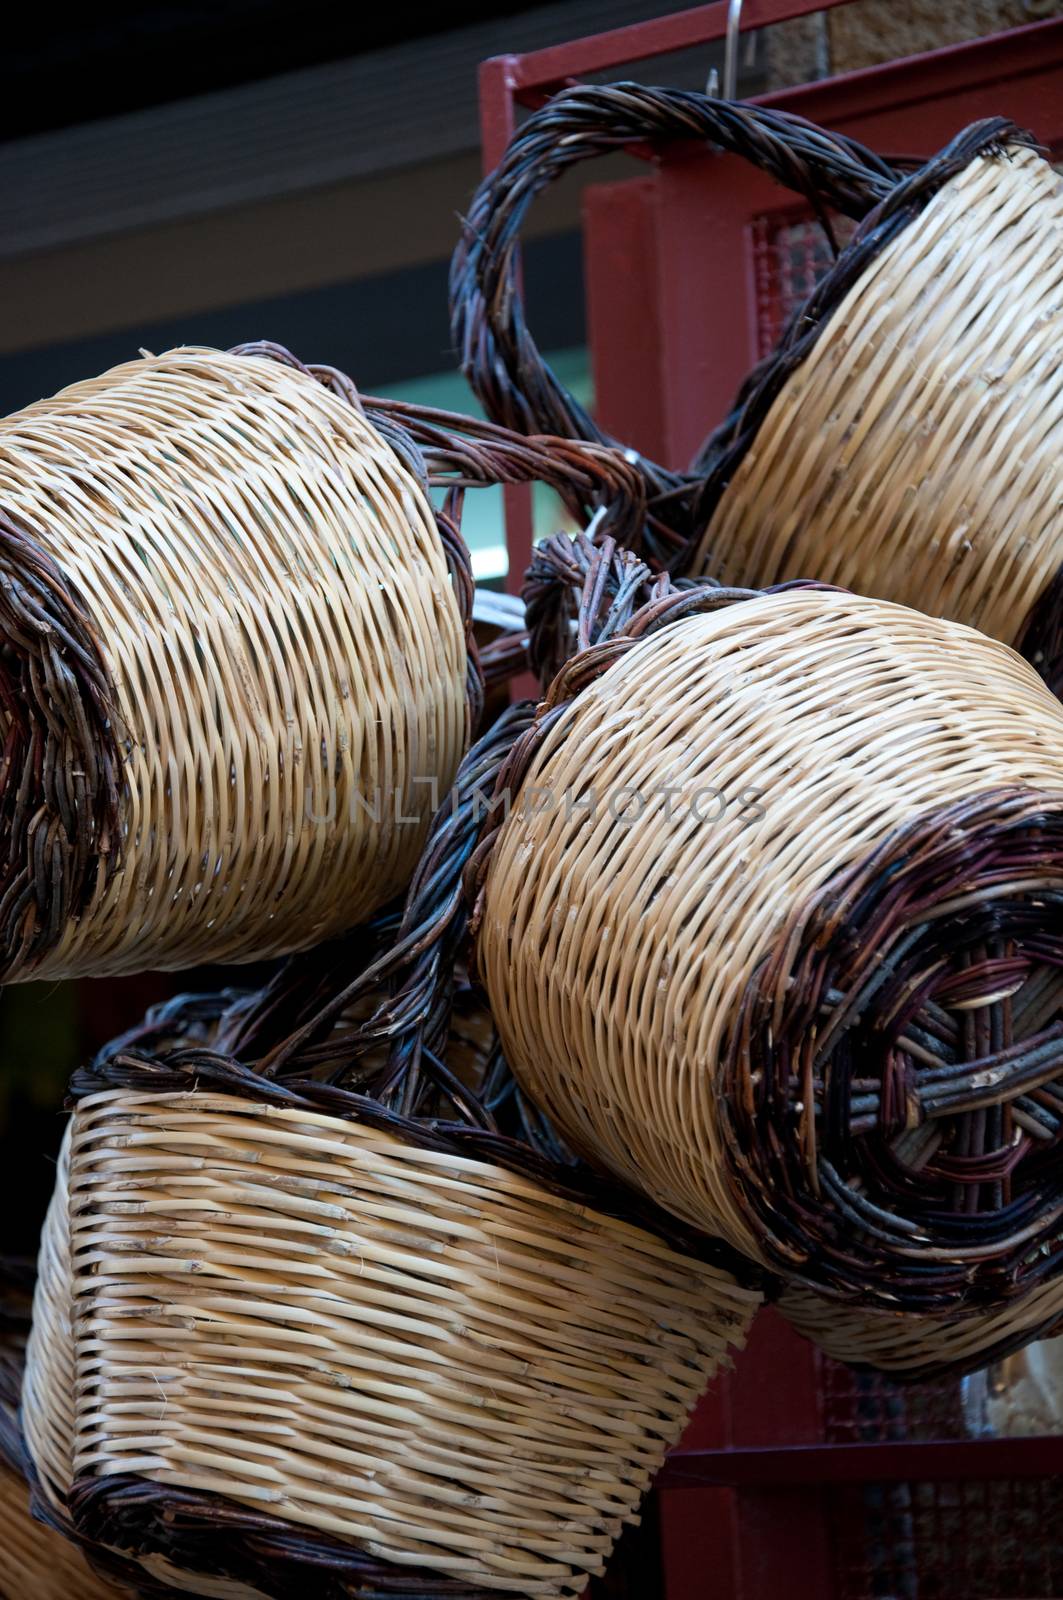 Group of handmade baskets straw attached to the door